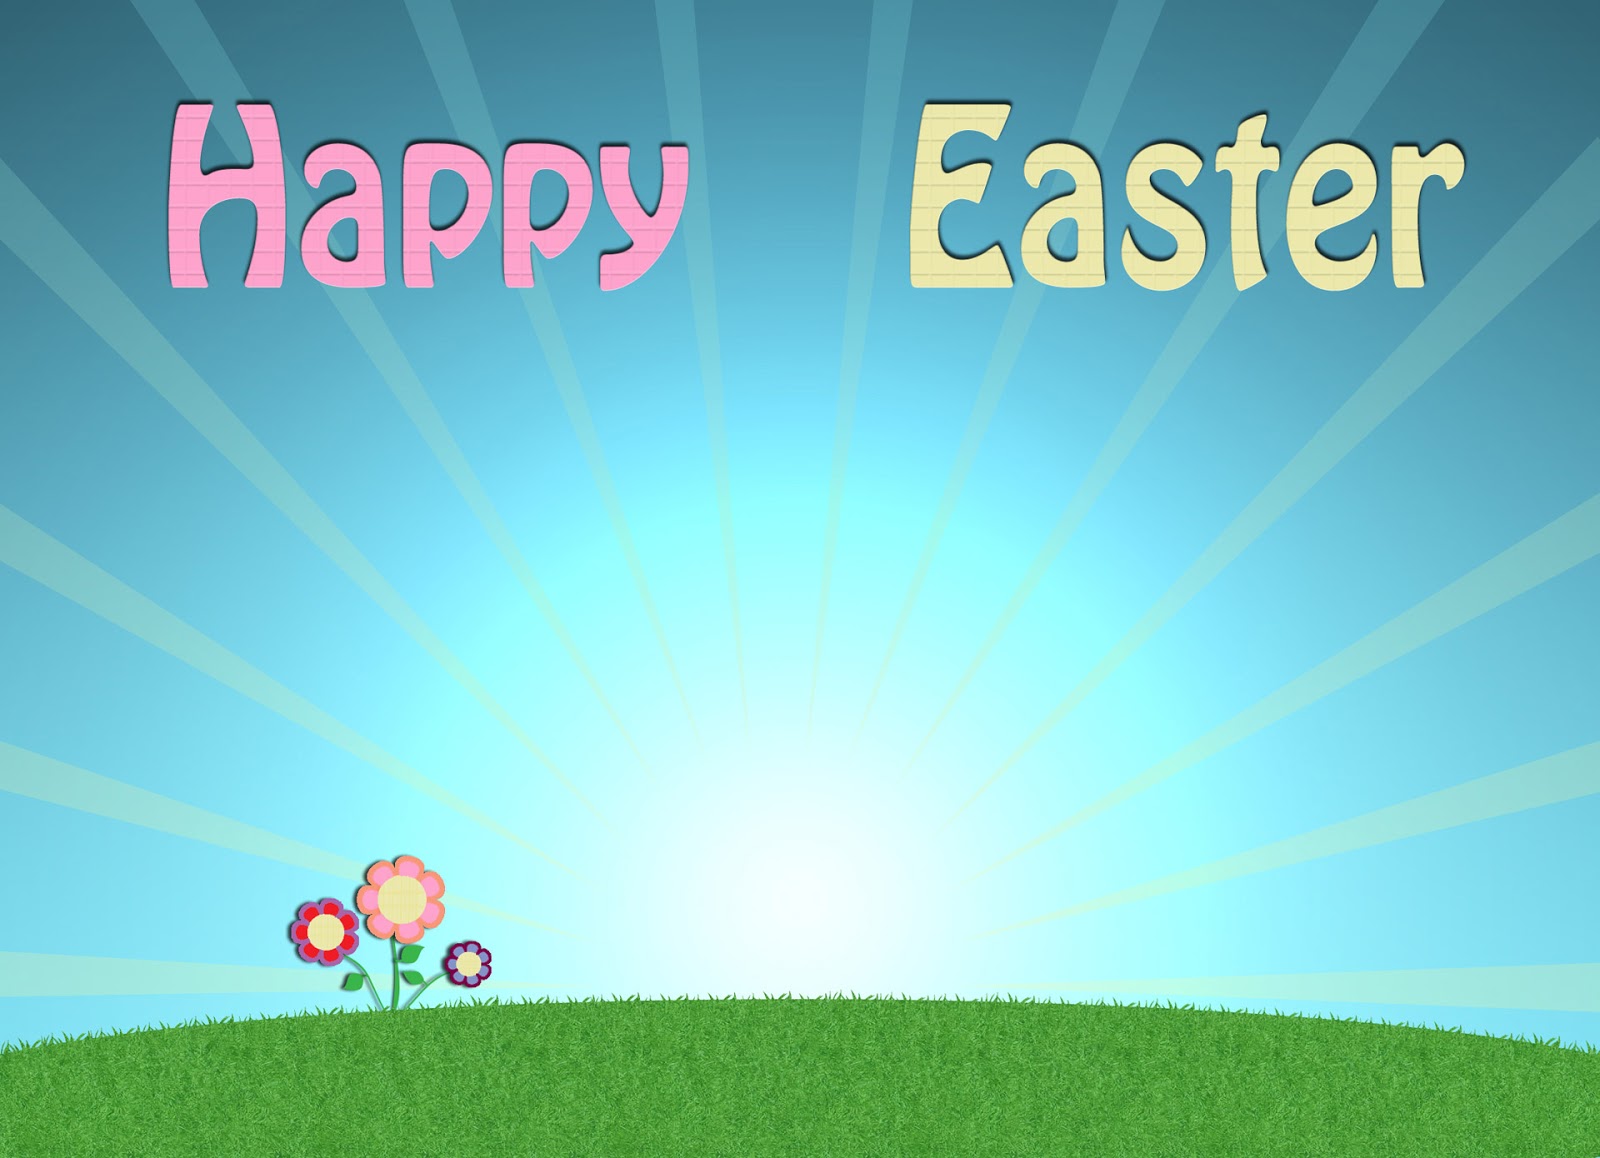 happy easter wishes wallpaper